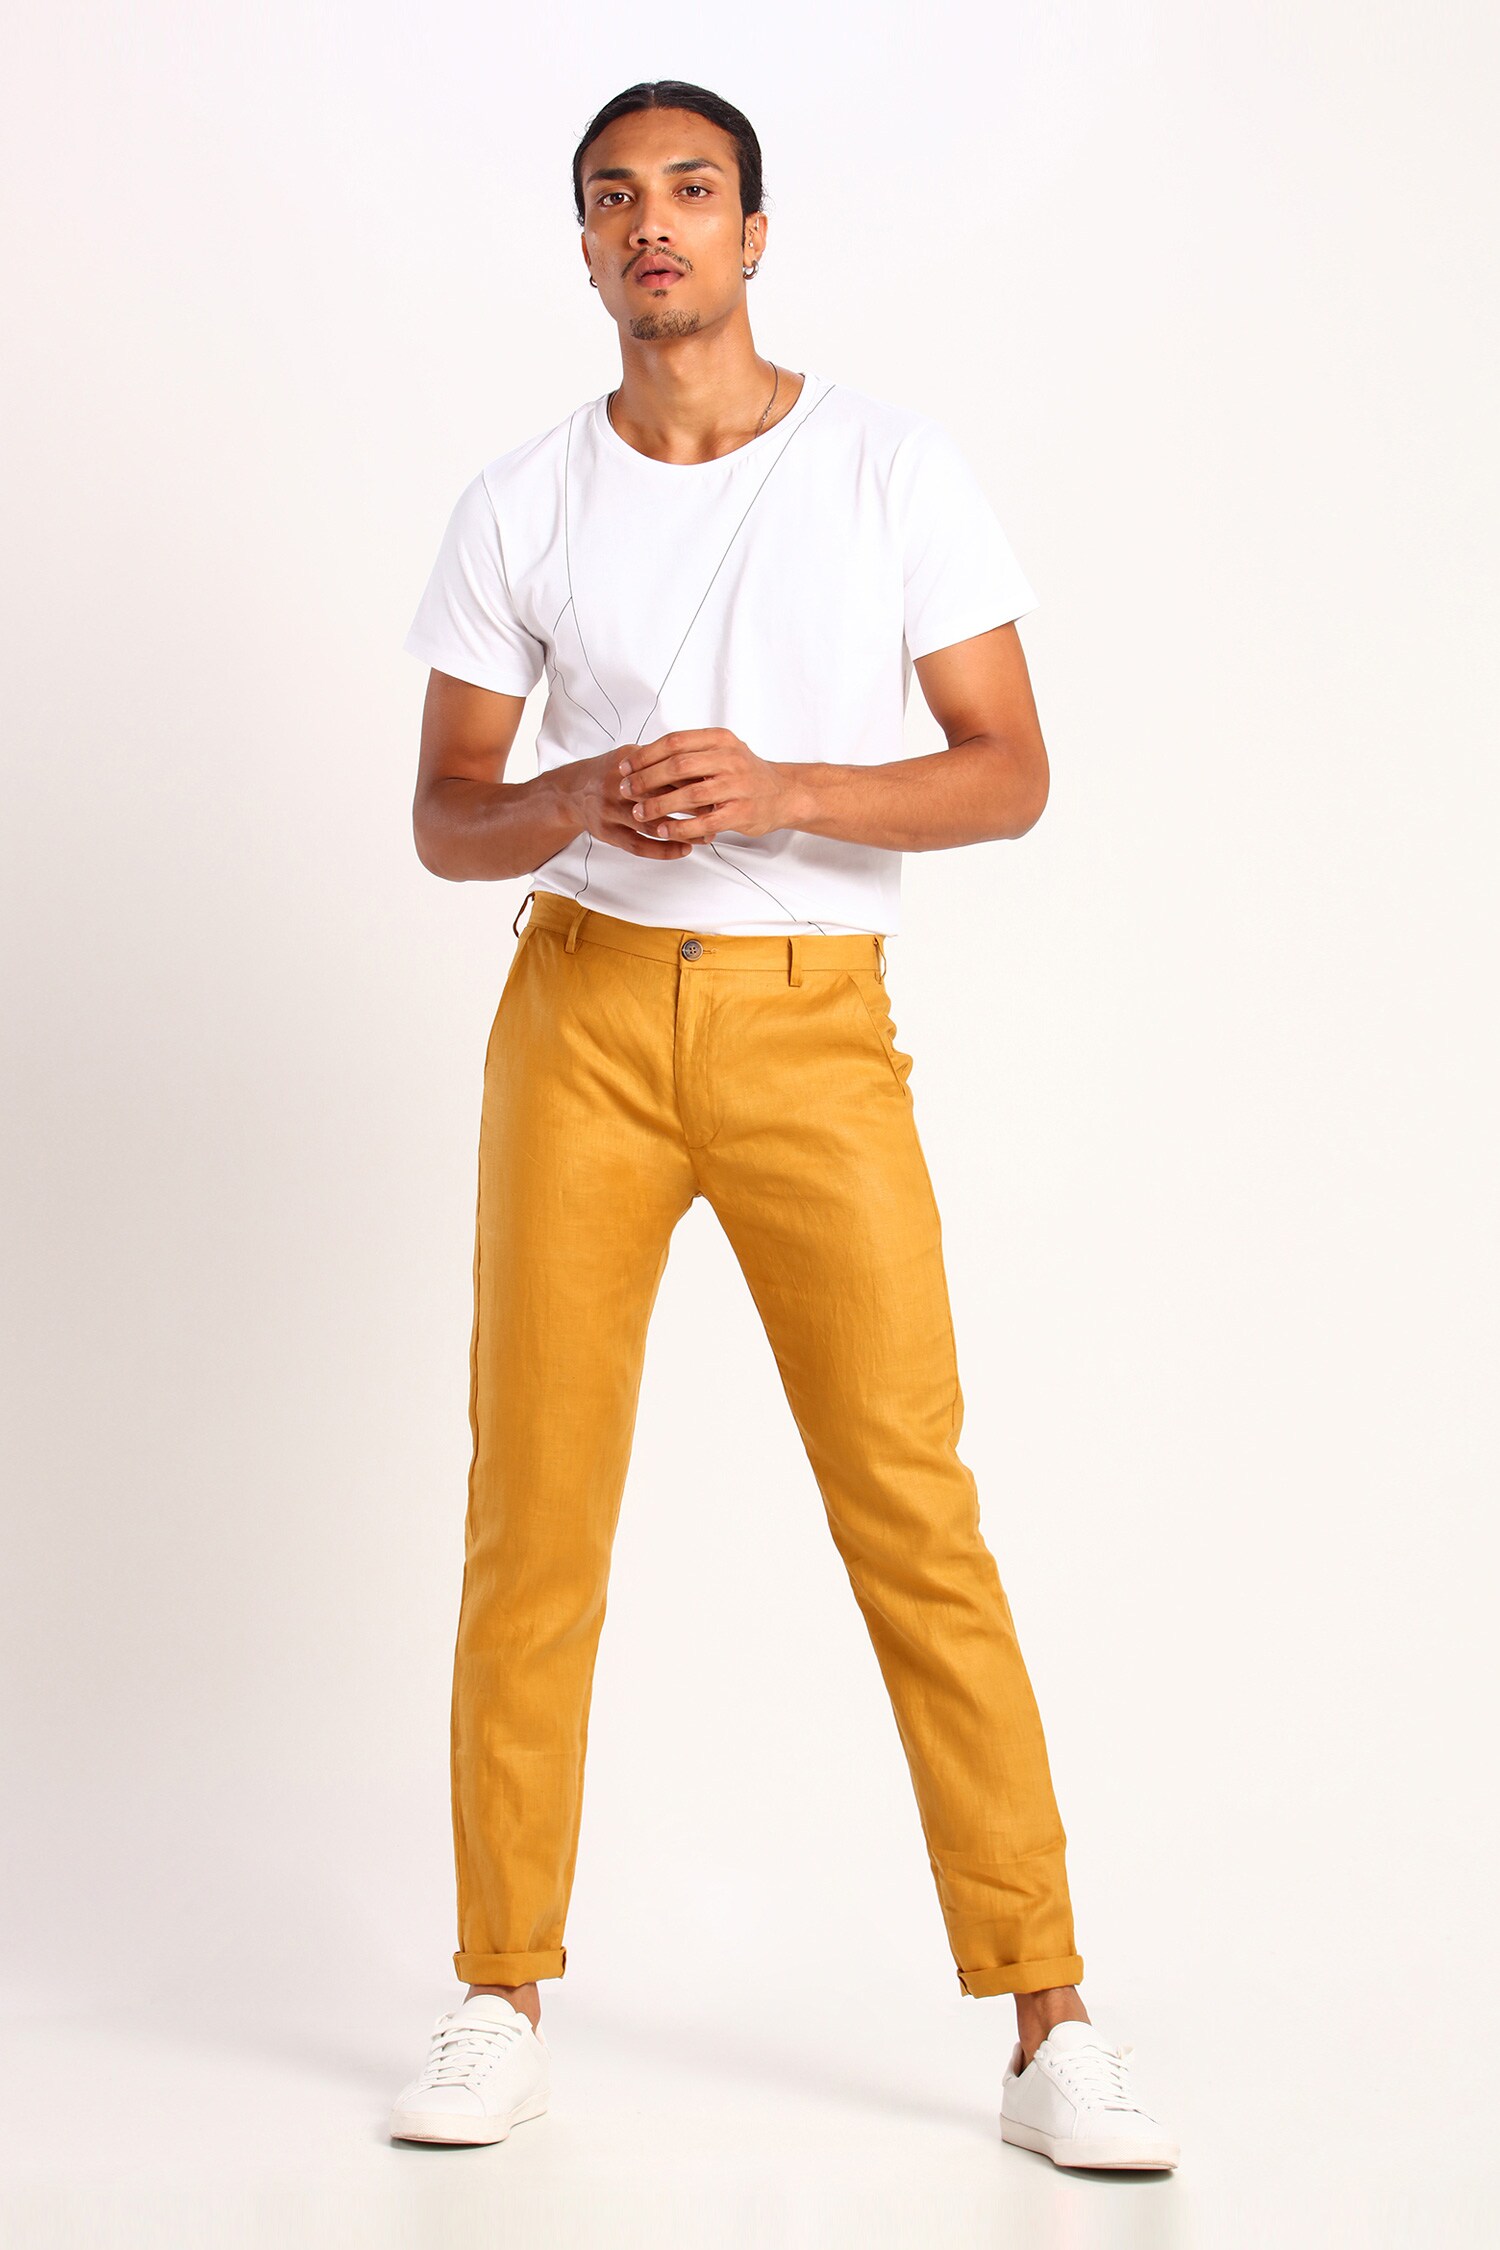 Buy Yellow Rayon Solid Women Regular Wear Pant for Best Price, Reviews,  Free Shipping